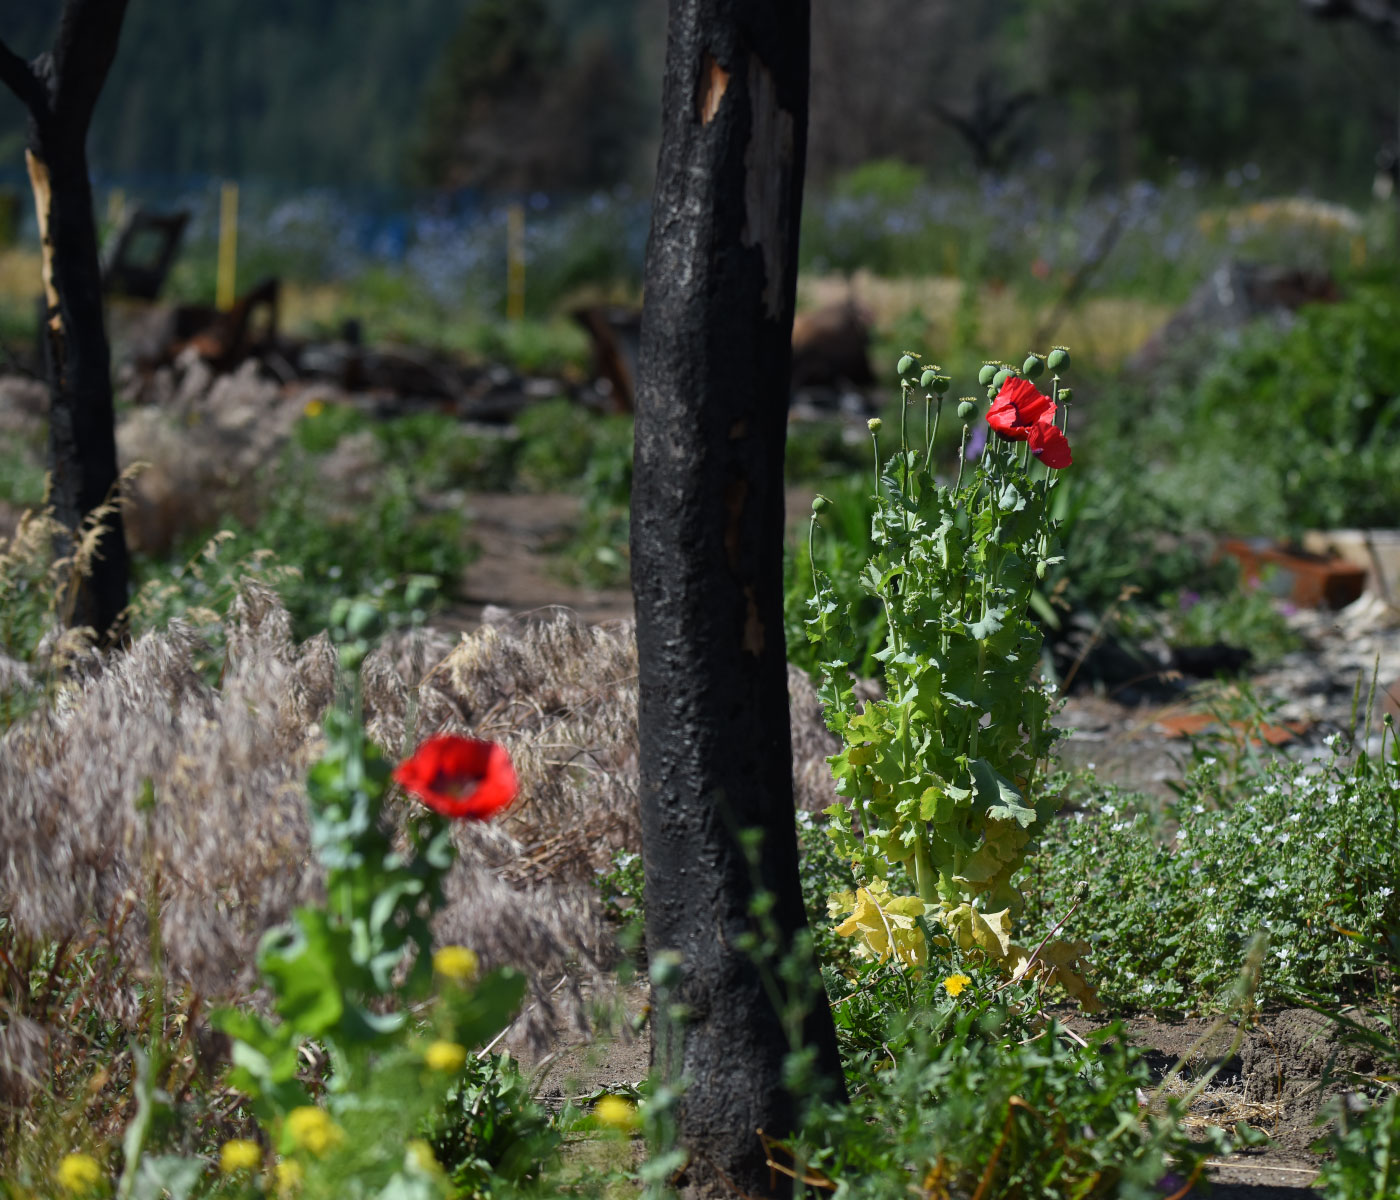 A close-up of a burnt, blackened tree trunk amidst poppies and other flora sprouting up from the ground.